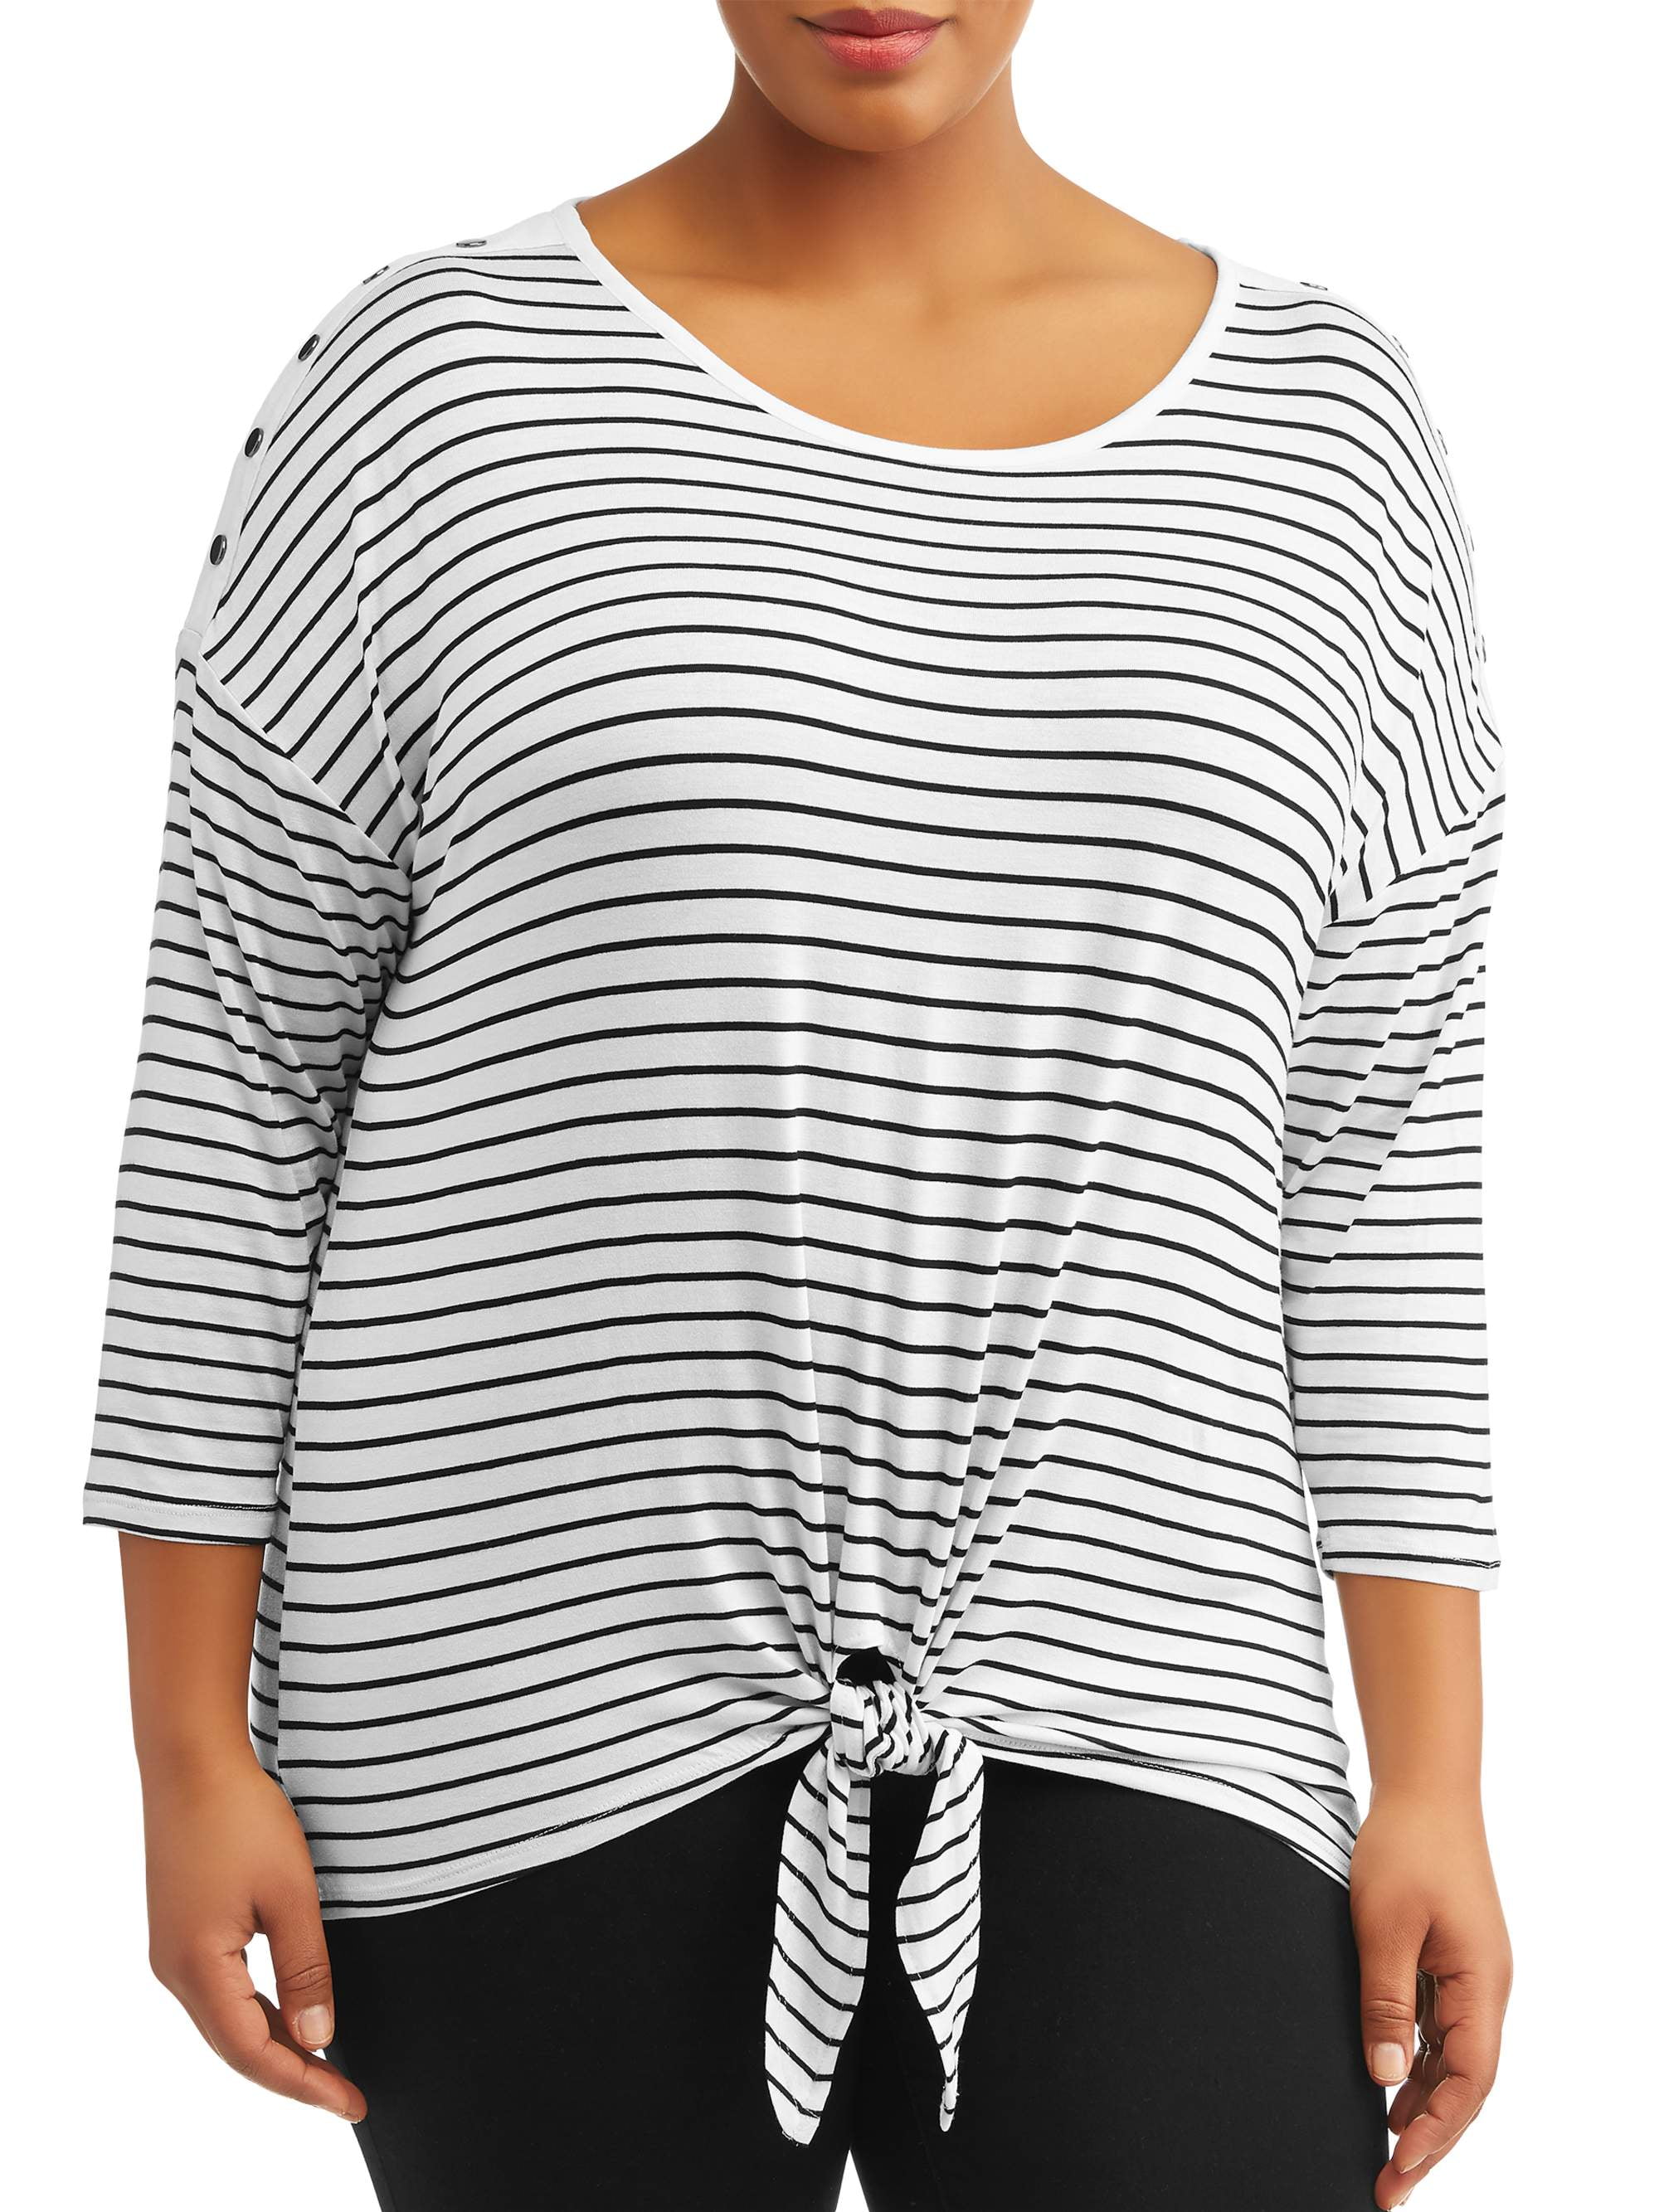 French Laundry - French Laundry Women's Plus Size 3/4 Sleeve Scoop Neck ...